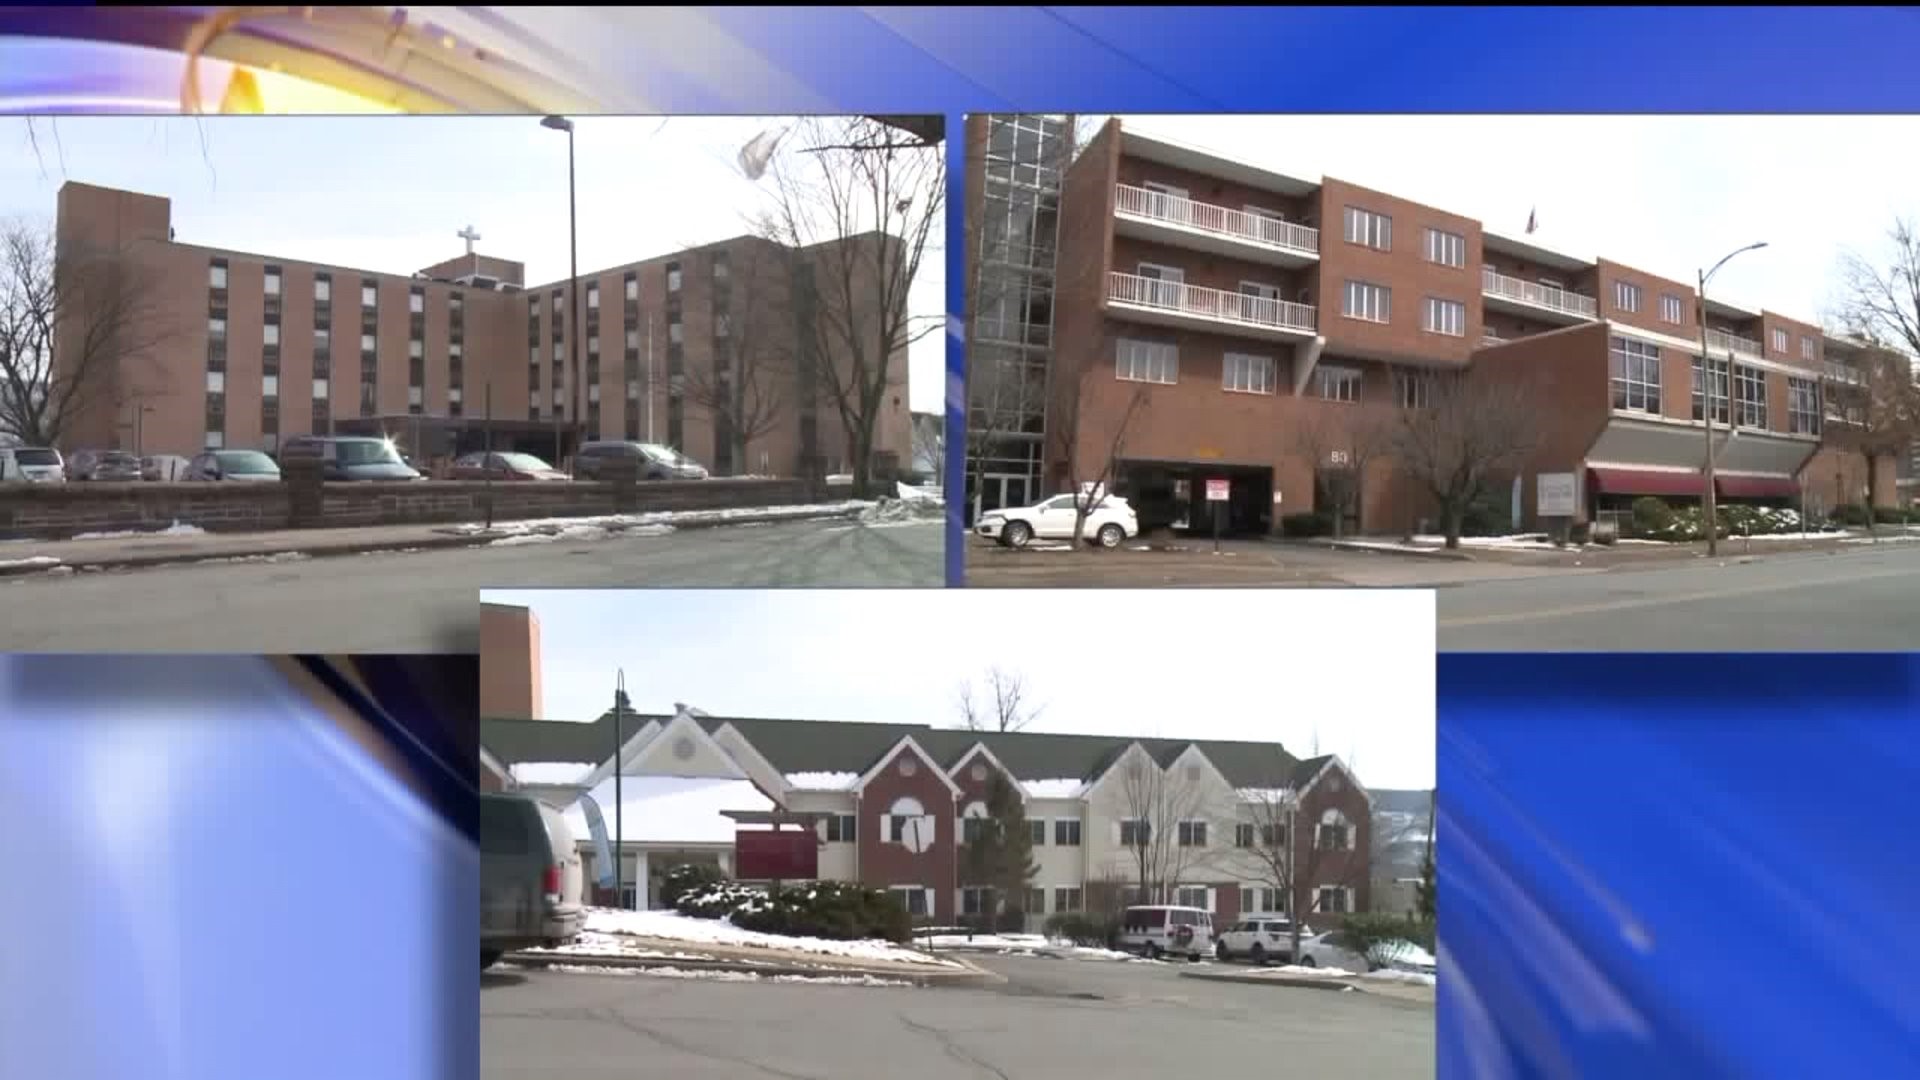 Diocese of Scranton to Sell Wilkes-Barre Long-term Care Facilities